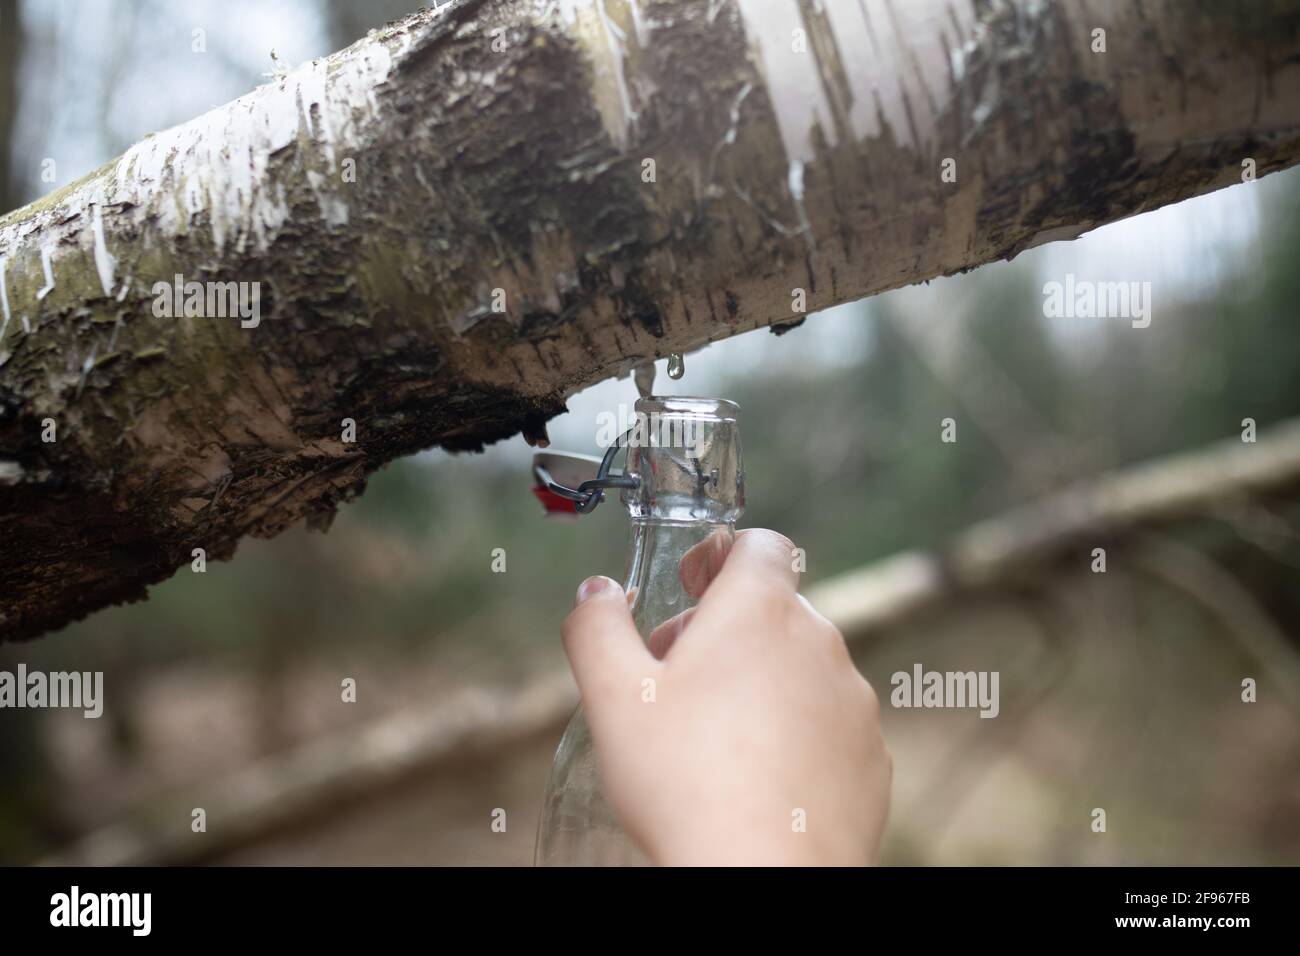 Extracted birch sap in a glass bottle. Stock Photo